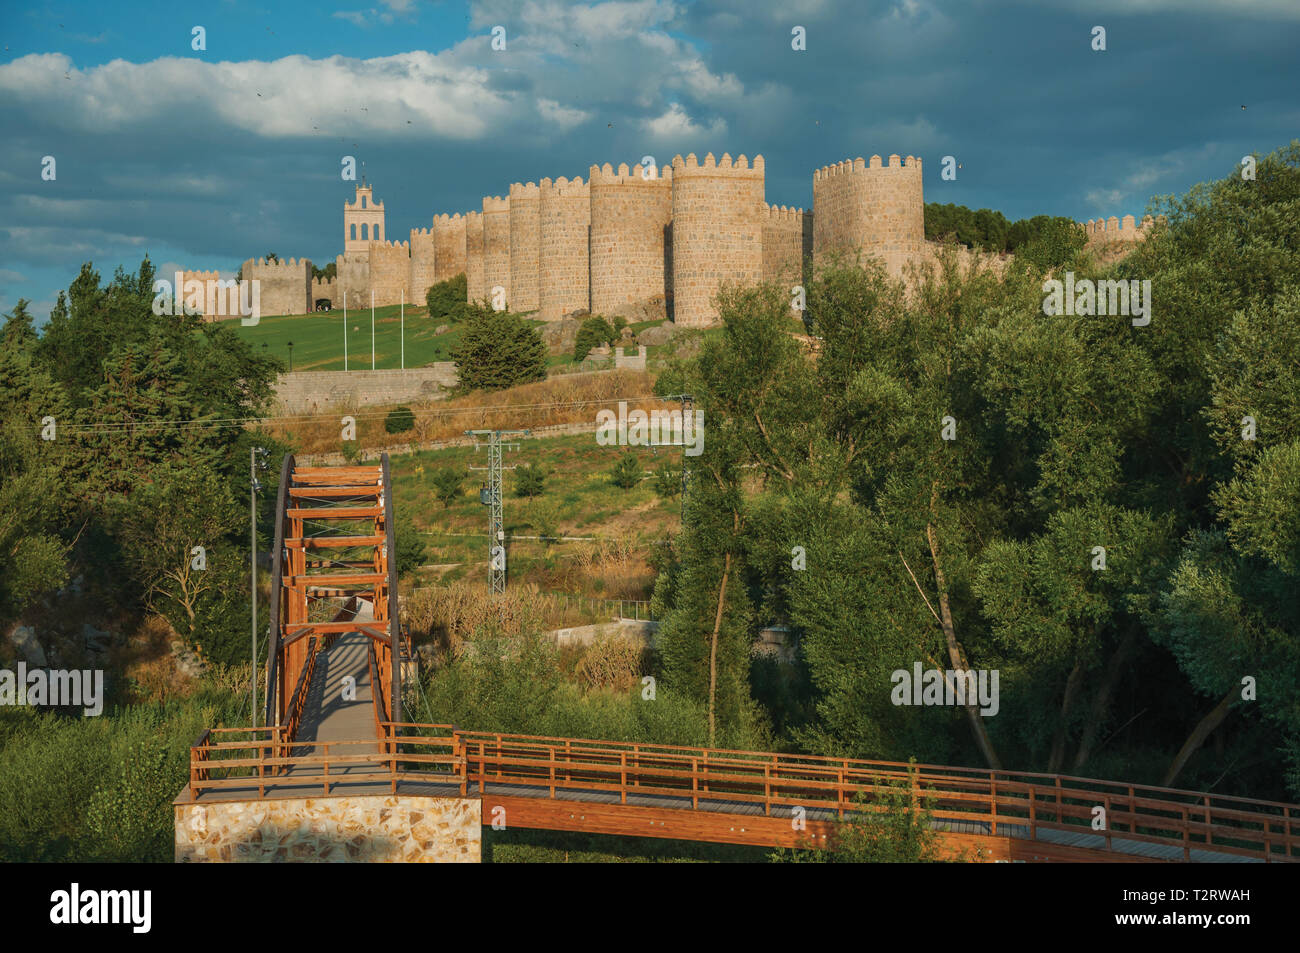 Wooden bridge over the Adaja River with trees and the city of Avila at sunset. With an imposing wall around the gothic city center in Spain. Stock Photo